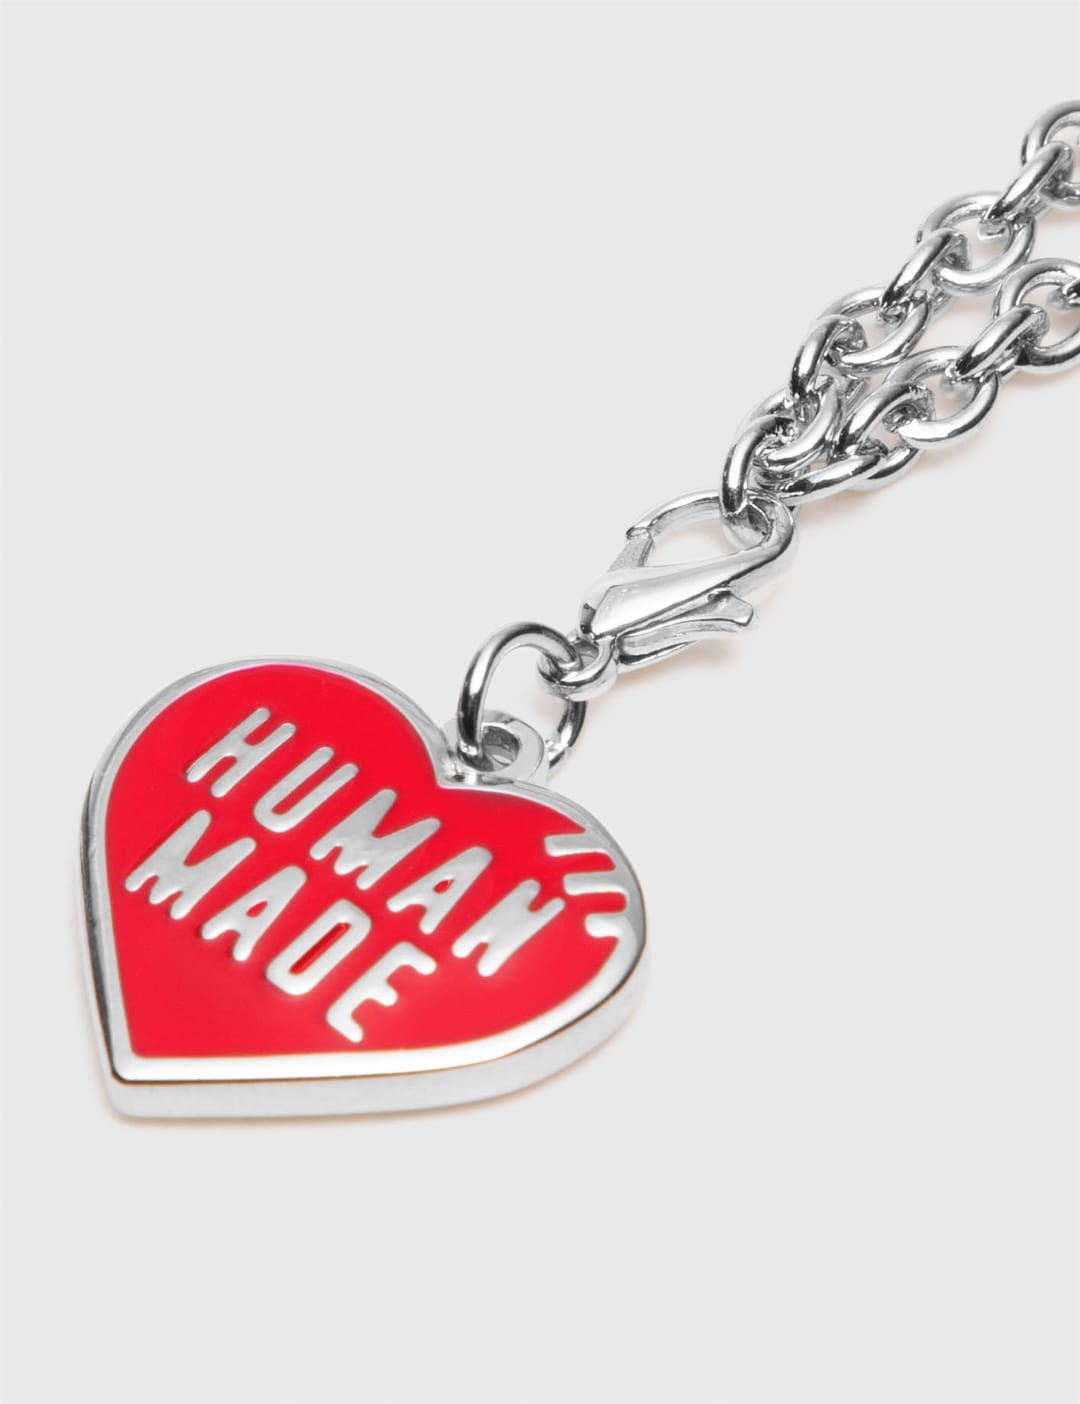 HUMAN MADE HEART SILVER NECKLACE ネックレス